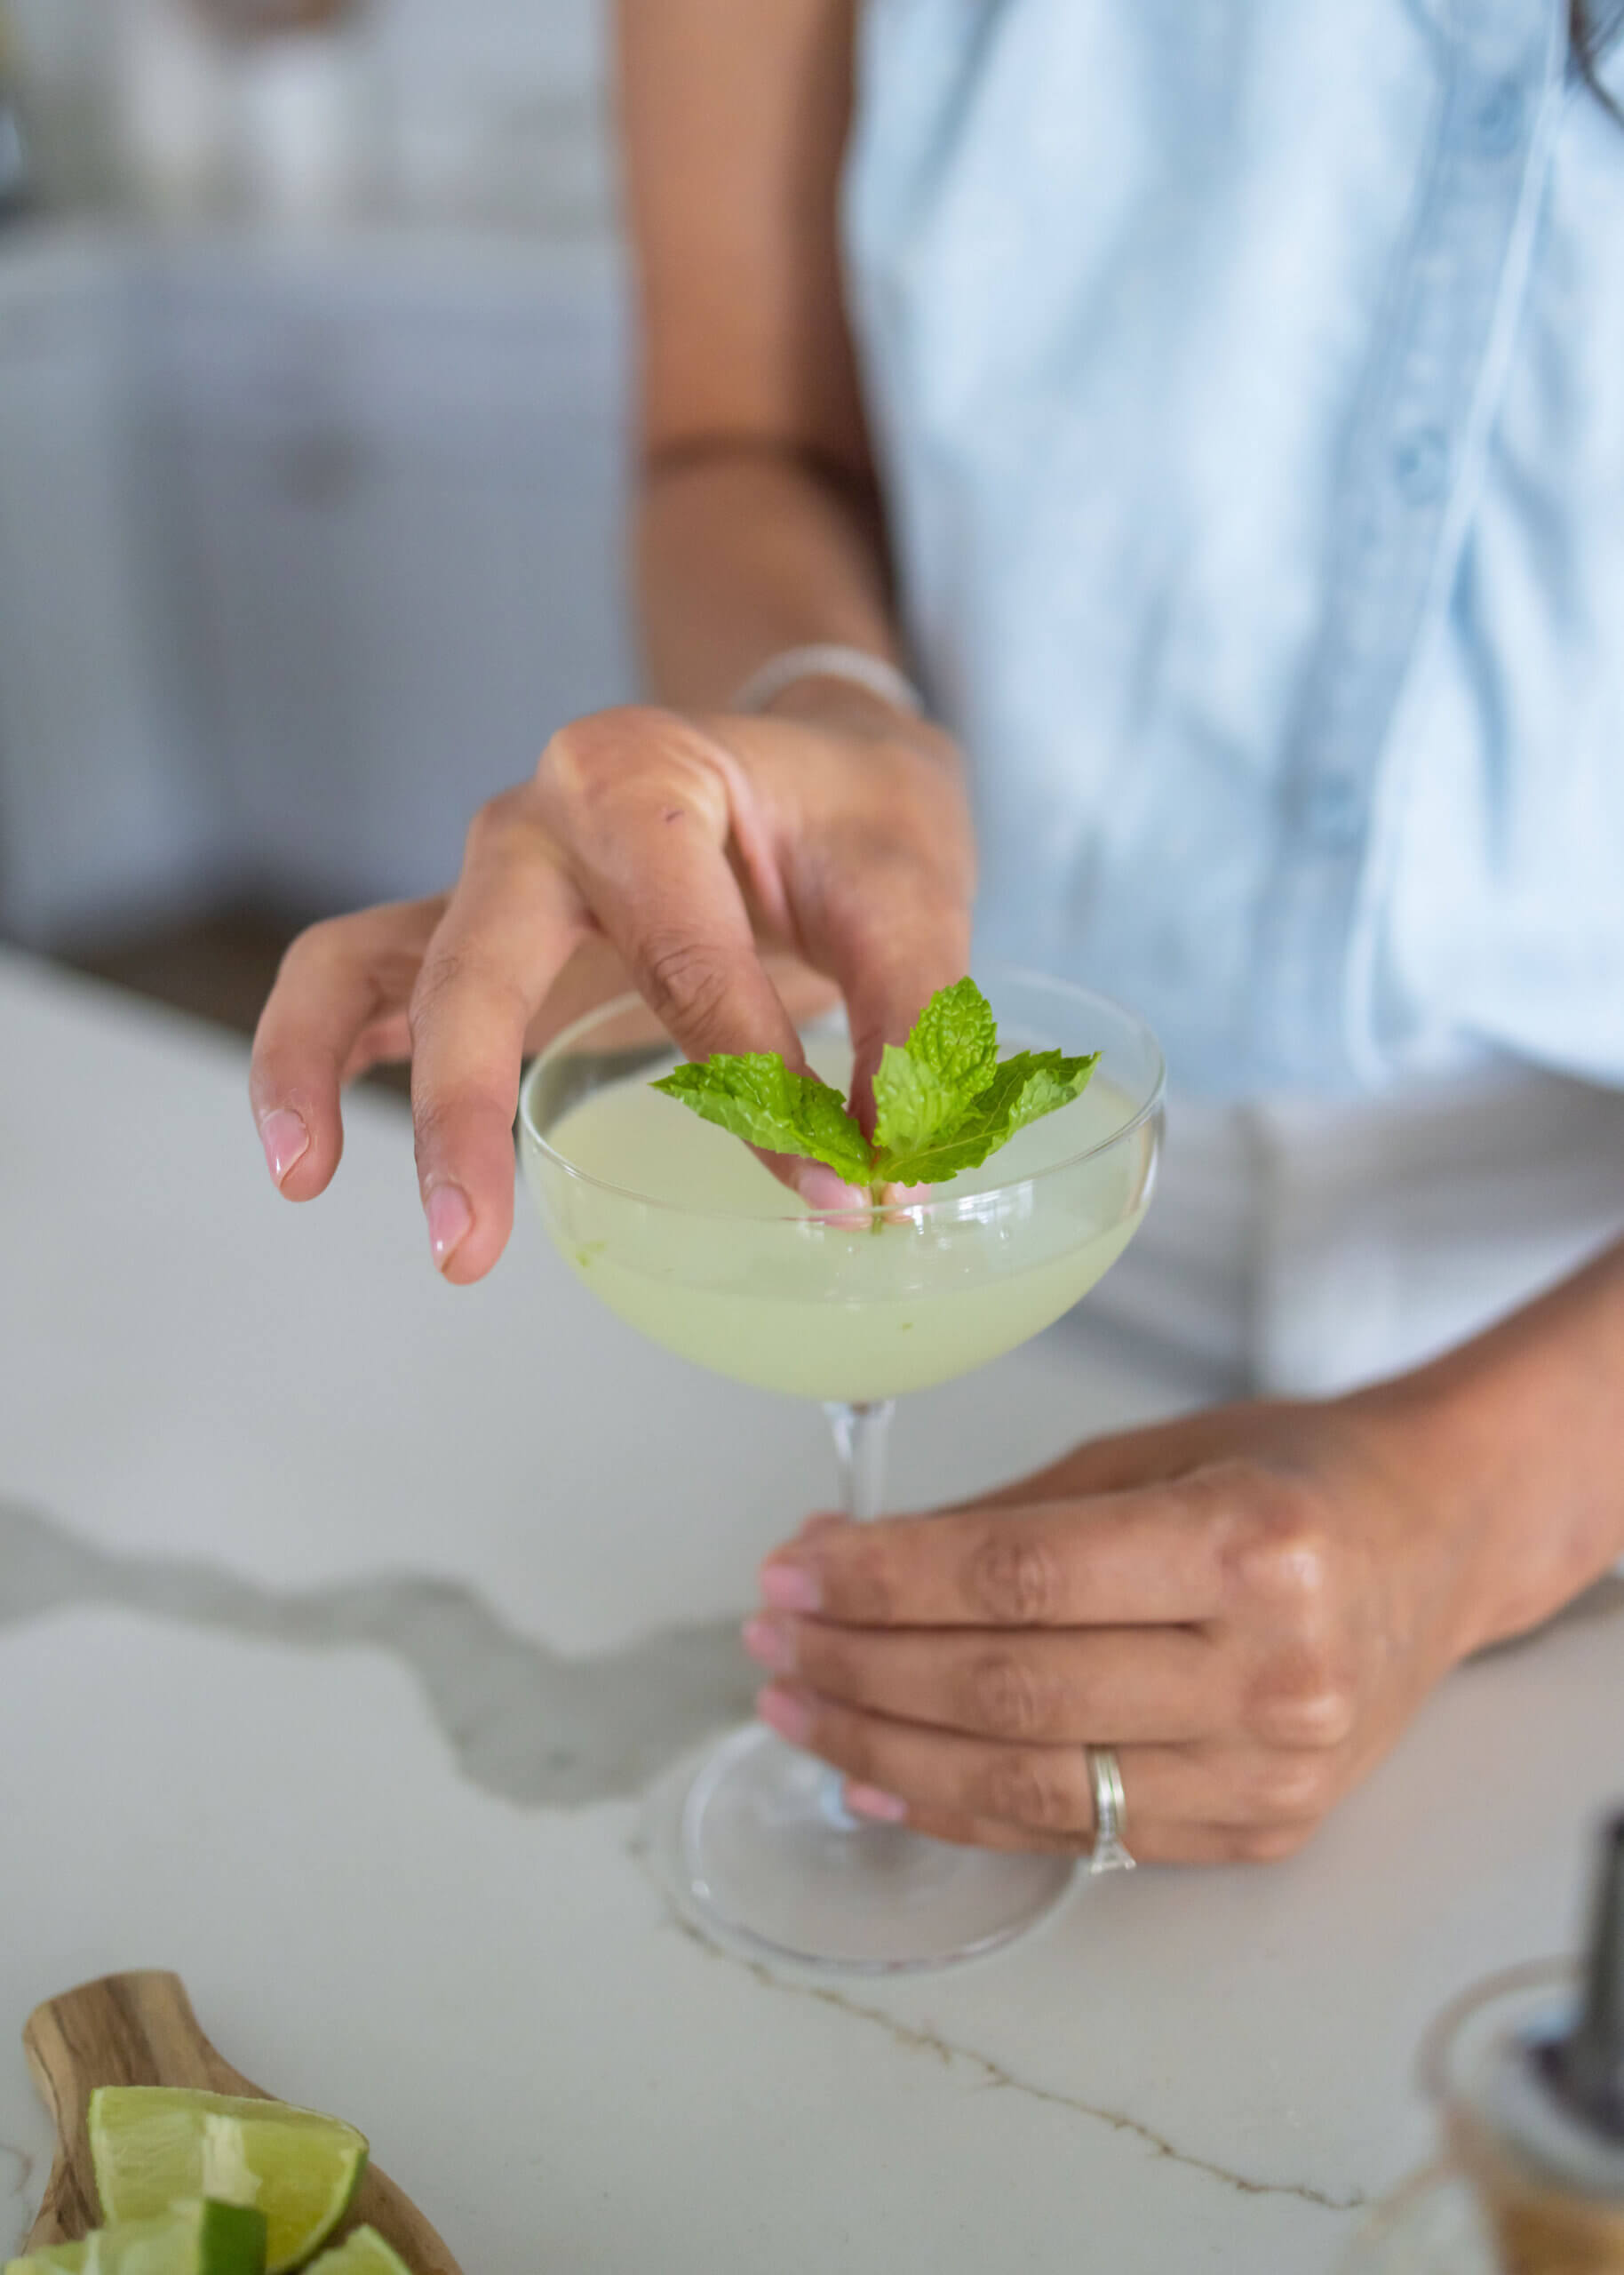 A glass with a light green liquid and a person putting a piece of fresh mint in the glass.  